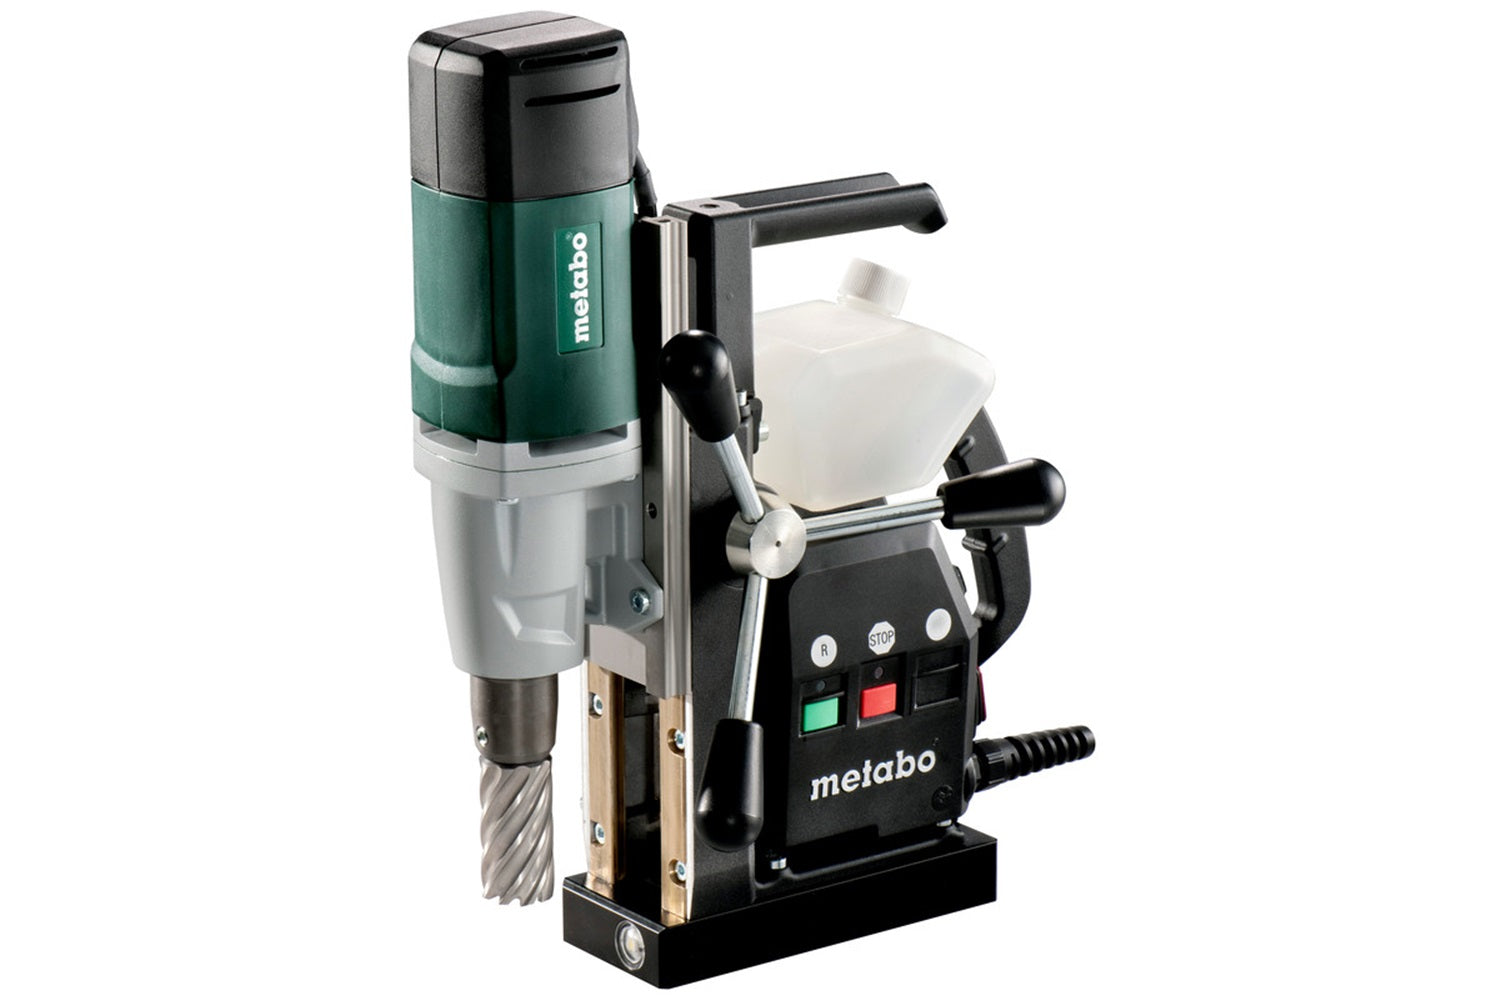 Metabo 600635620 Mag 32 Magnetic Core Drill Press